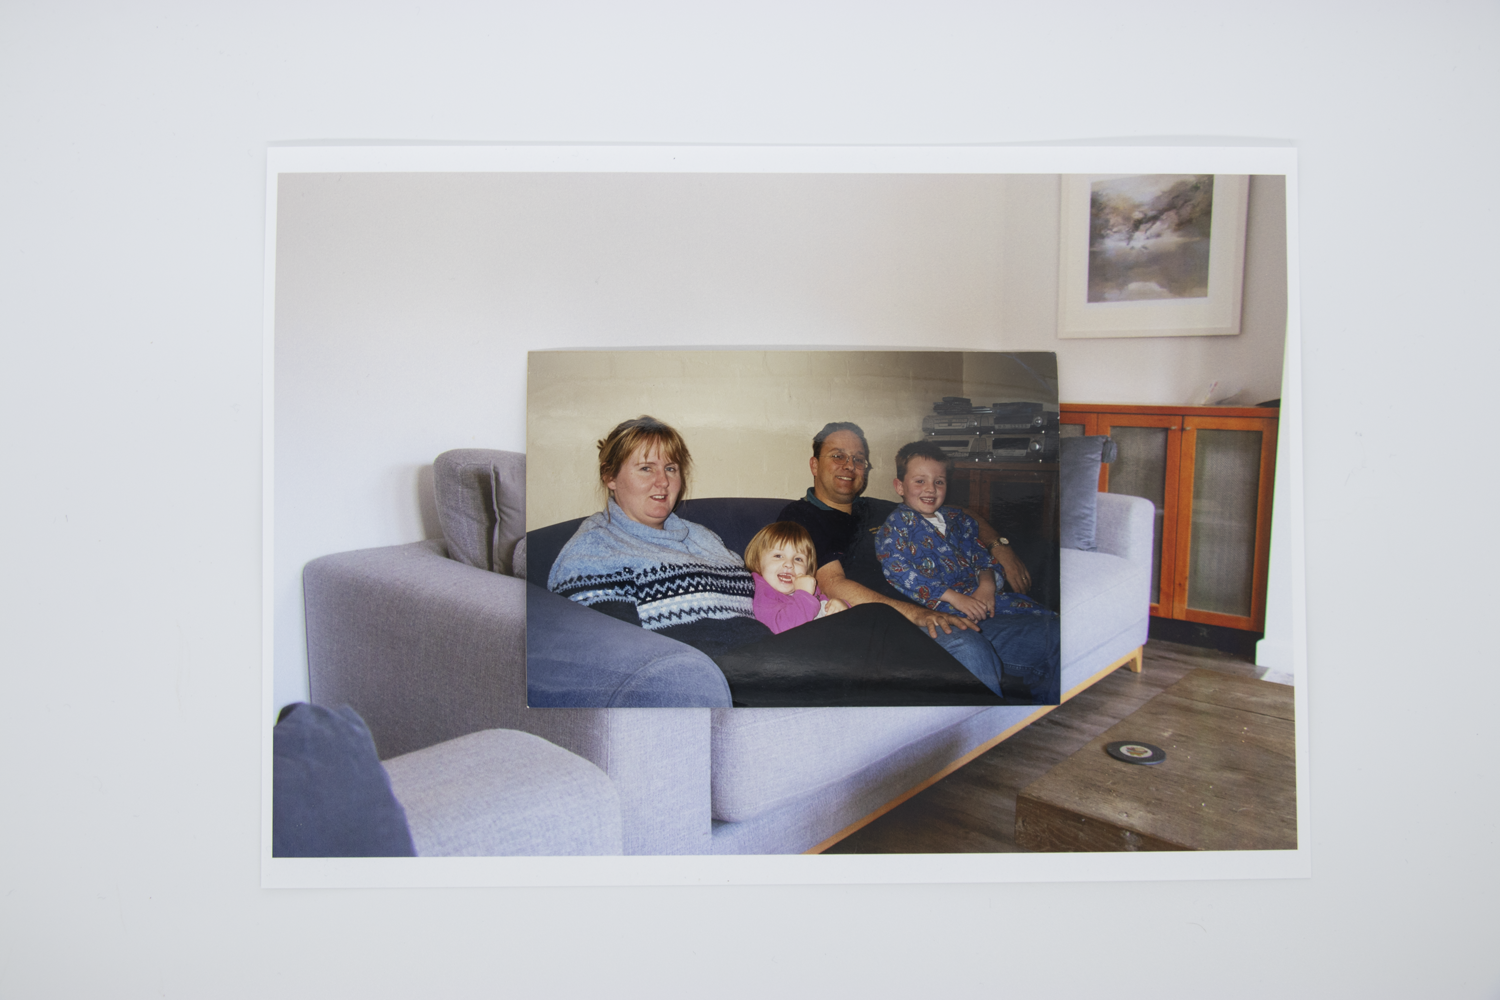 Coloured photograph depicting two children and mother sitting on a couch in a domestic lounge room. Photo is bordered by a secondary image of an empty domestic lounge room with grey couches.